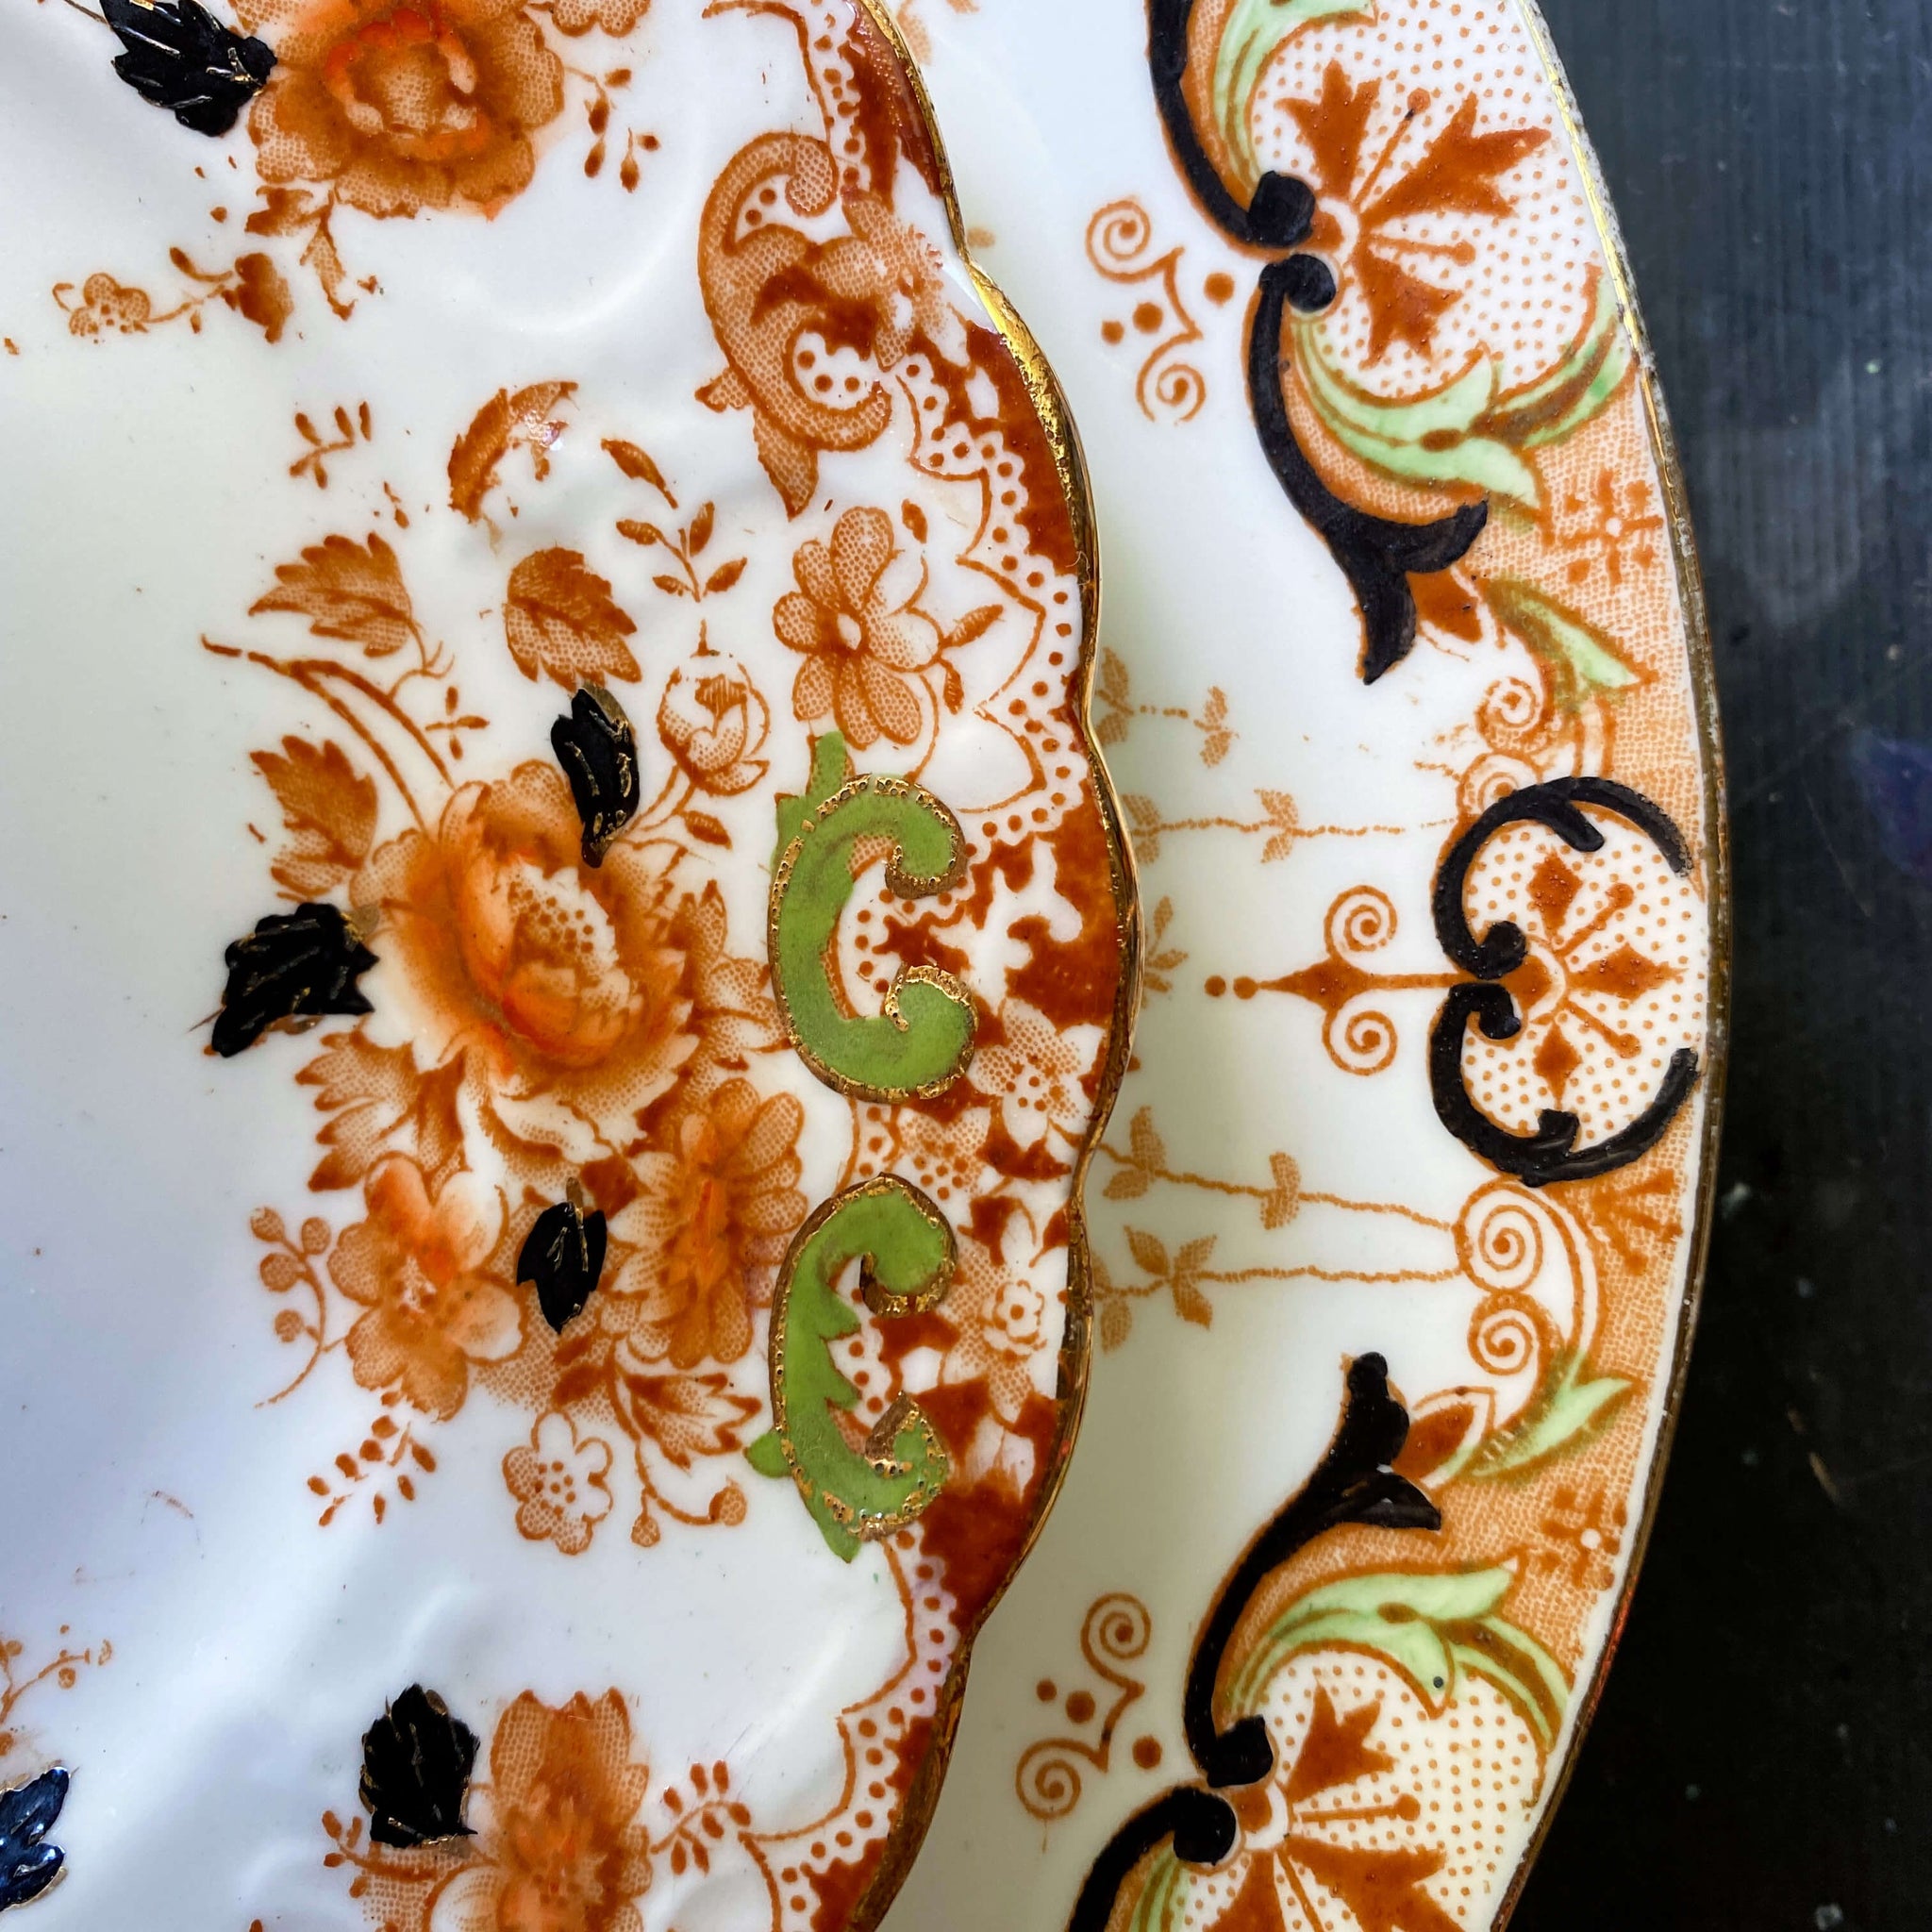 Antique Autumn Floral Mismatched Serving Plates - Set of Two circa early 1900s